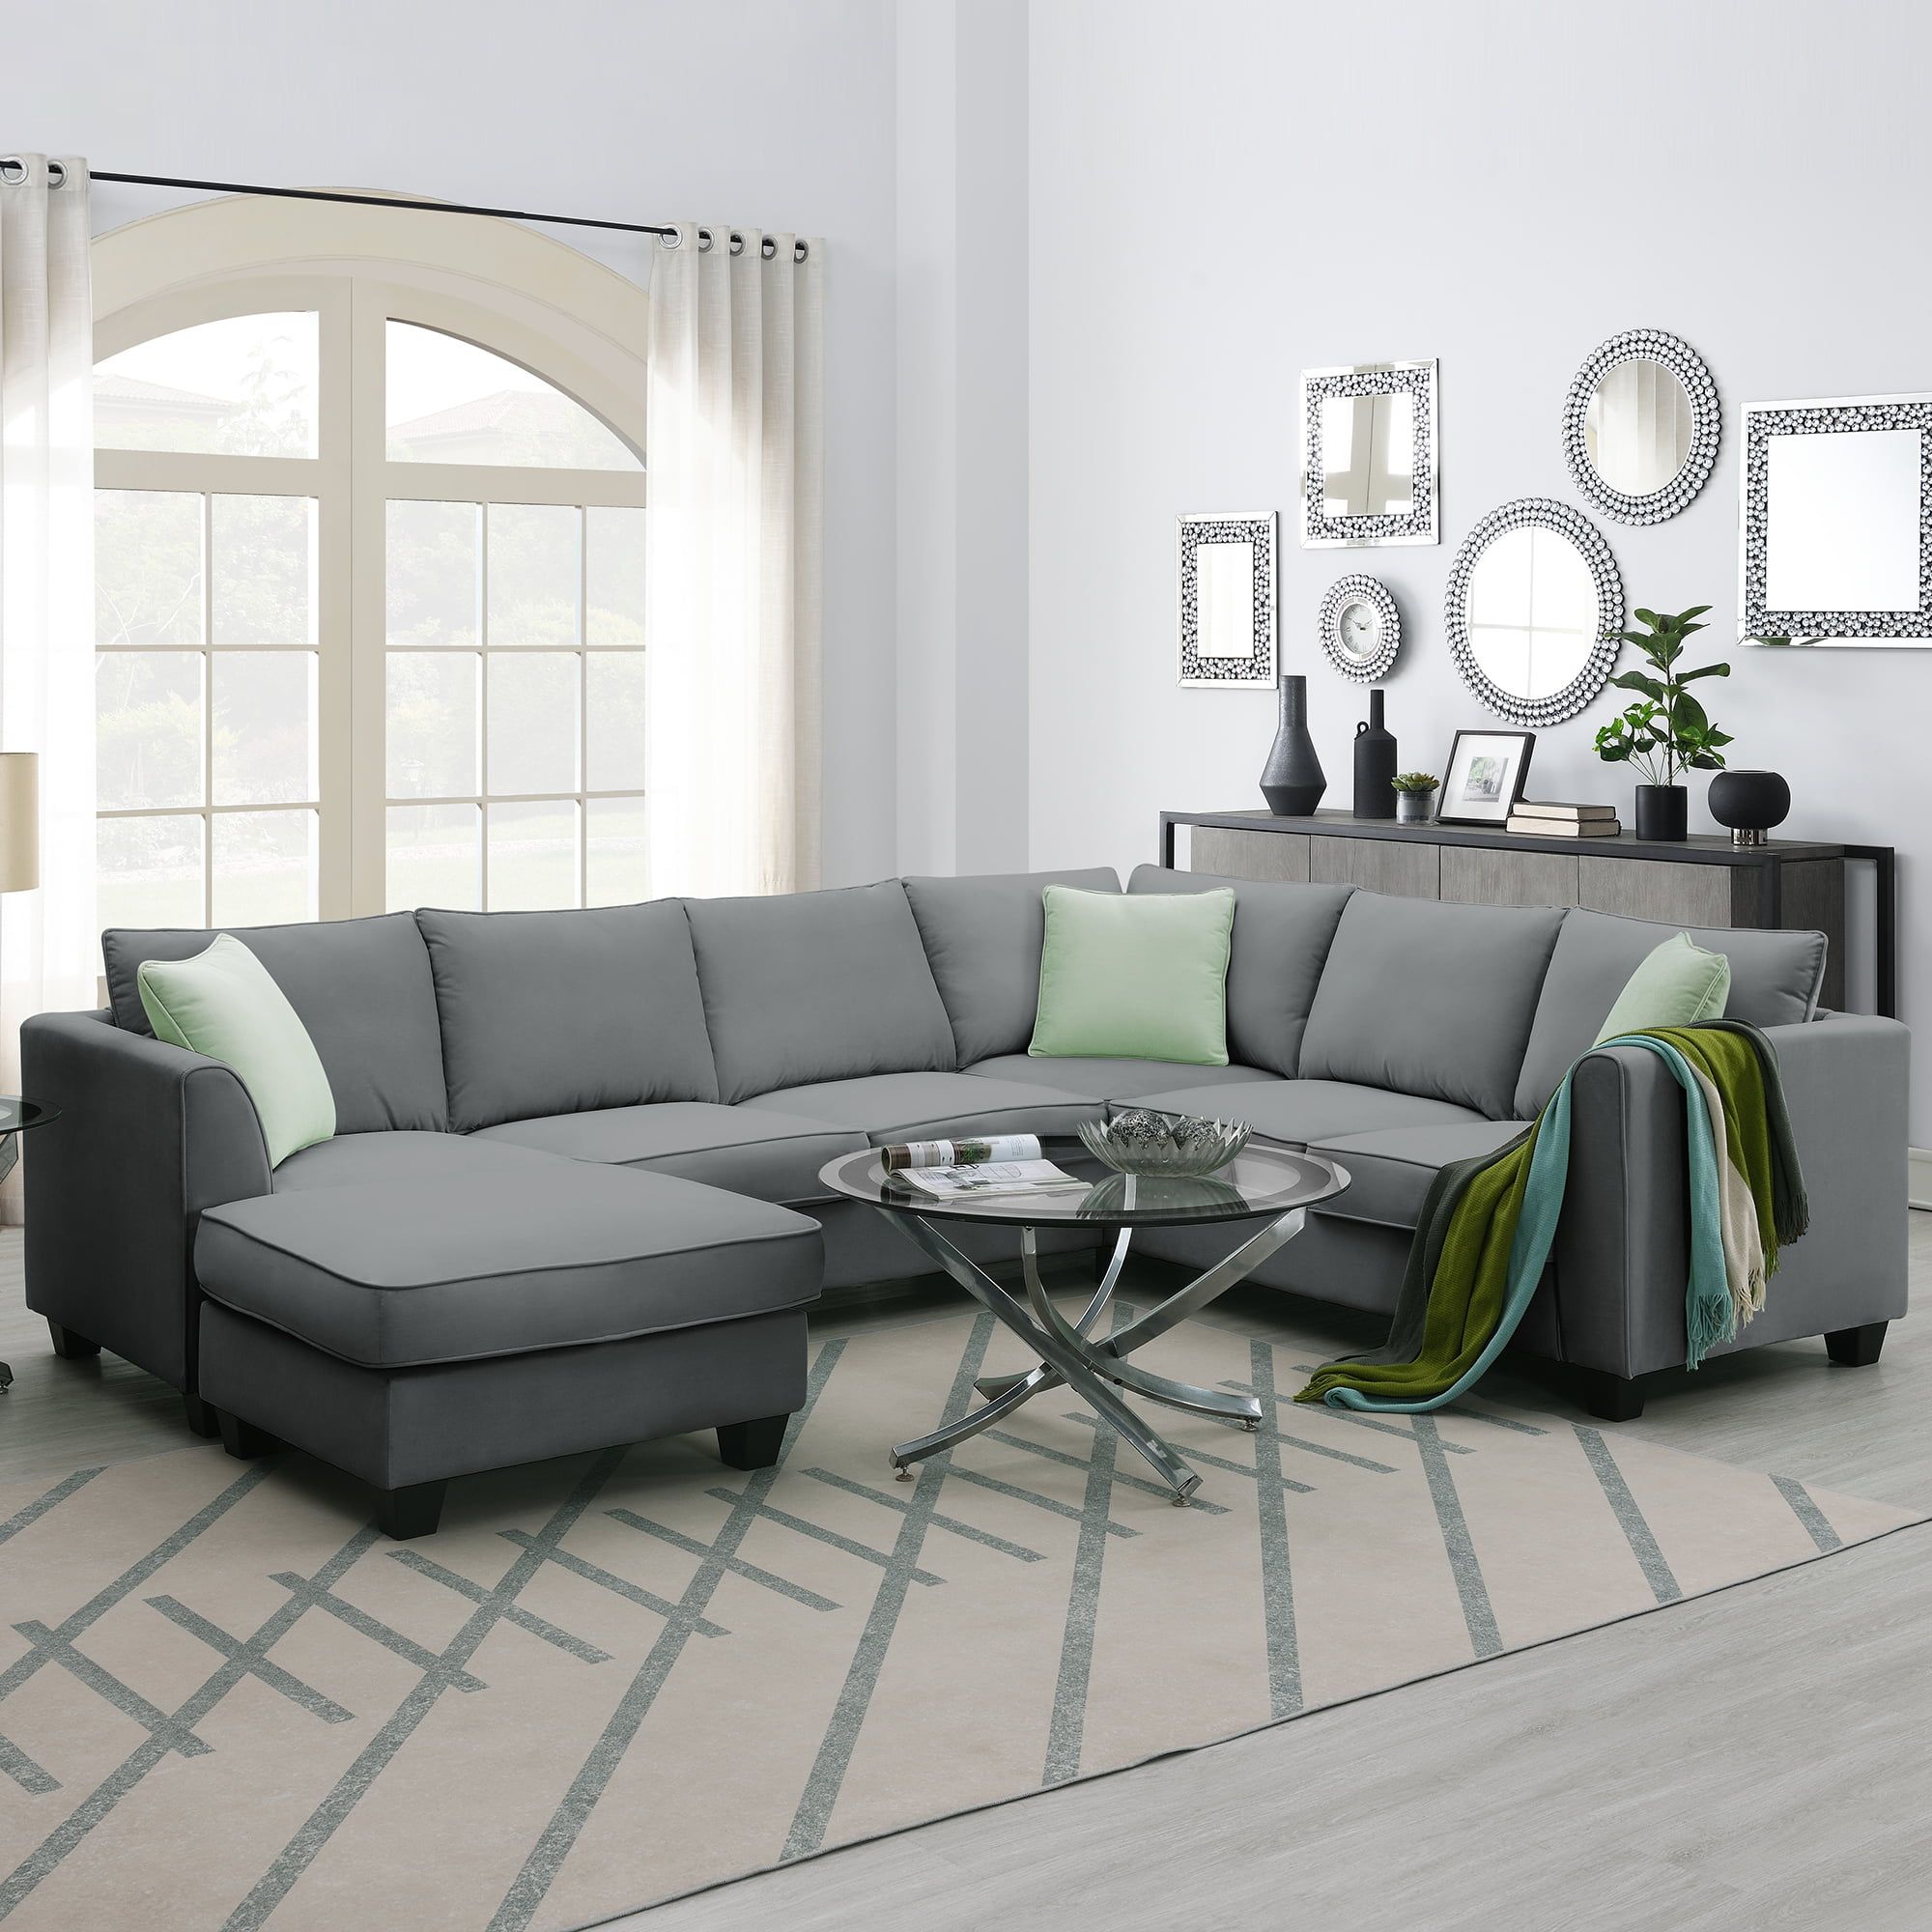 L Shaped Modular Sectional Couch, Kamida 7 Seater Sectional Couch With  Ottoman And 3 Pillows, Modern L Shaped Fabric Upholstered Couch Furniture, Heavy  Duty Sectional Couch For Living Room, Gray – Walmart With Regard To Heavy Duty Sectional Couches (Photo 2 of 15)